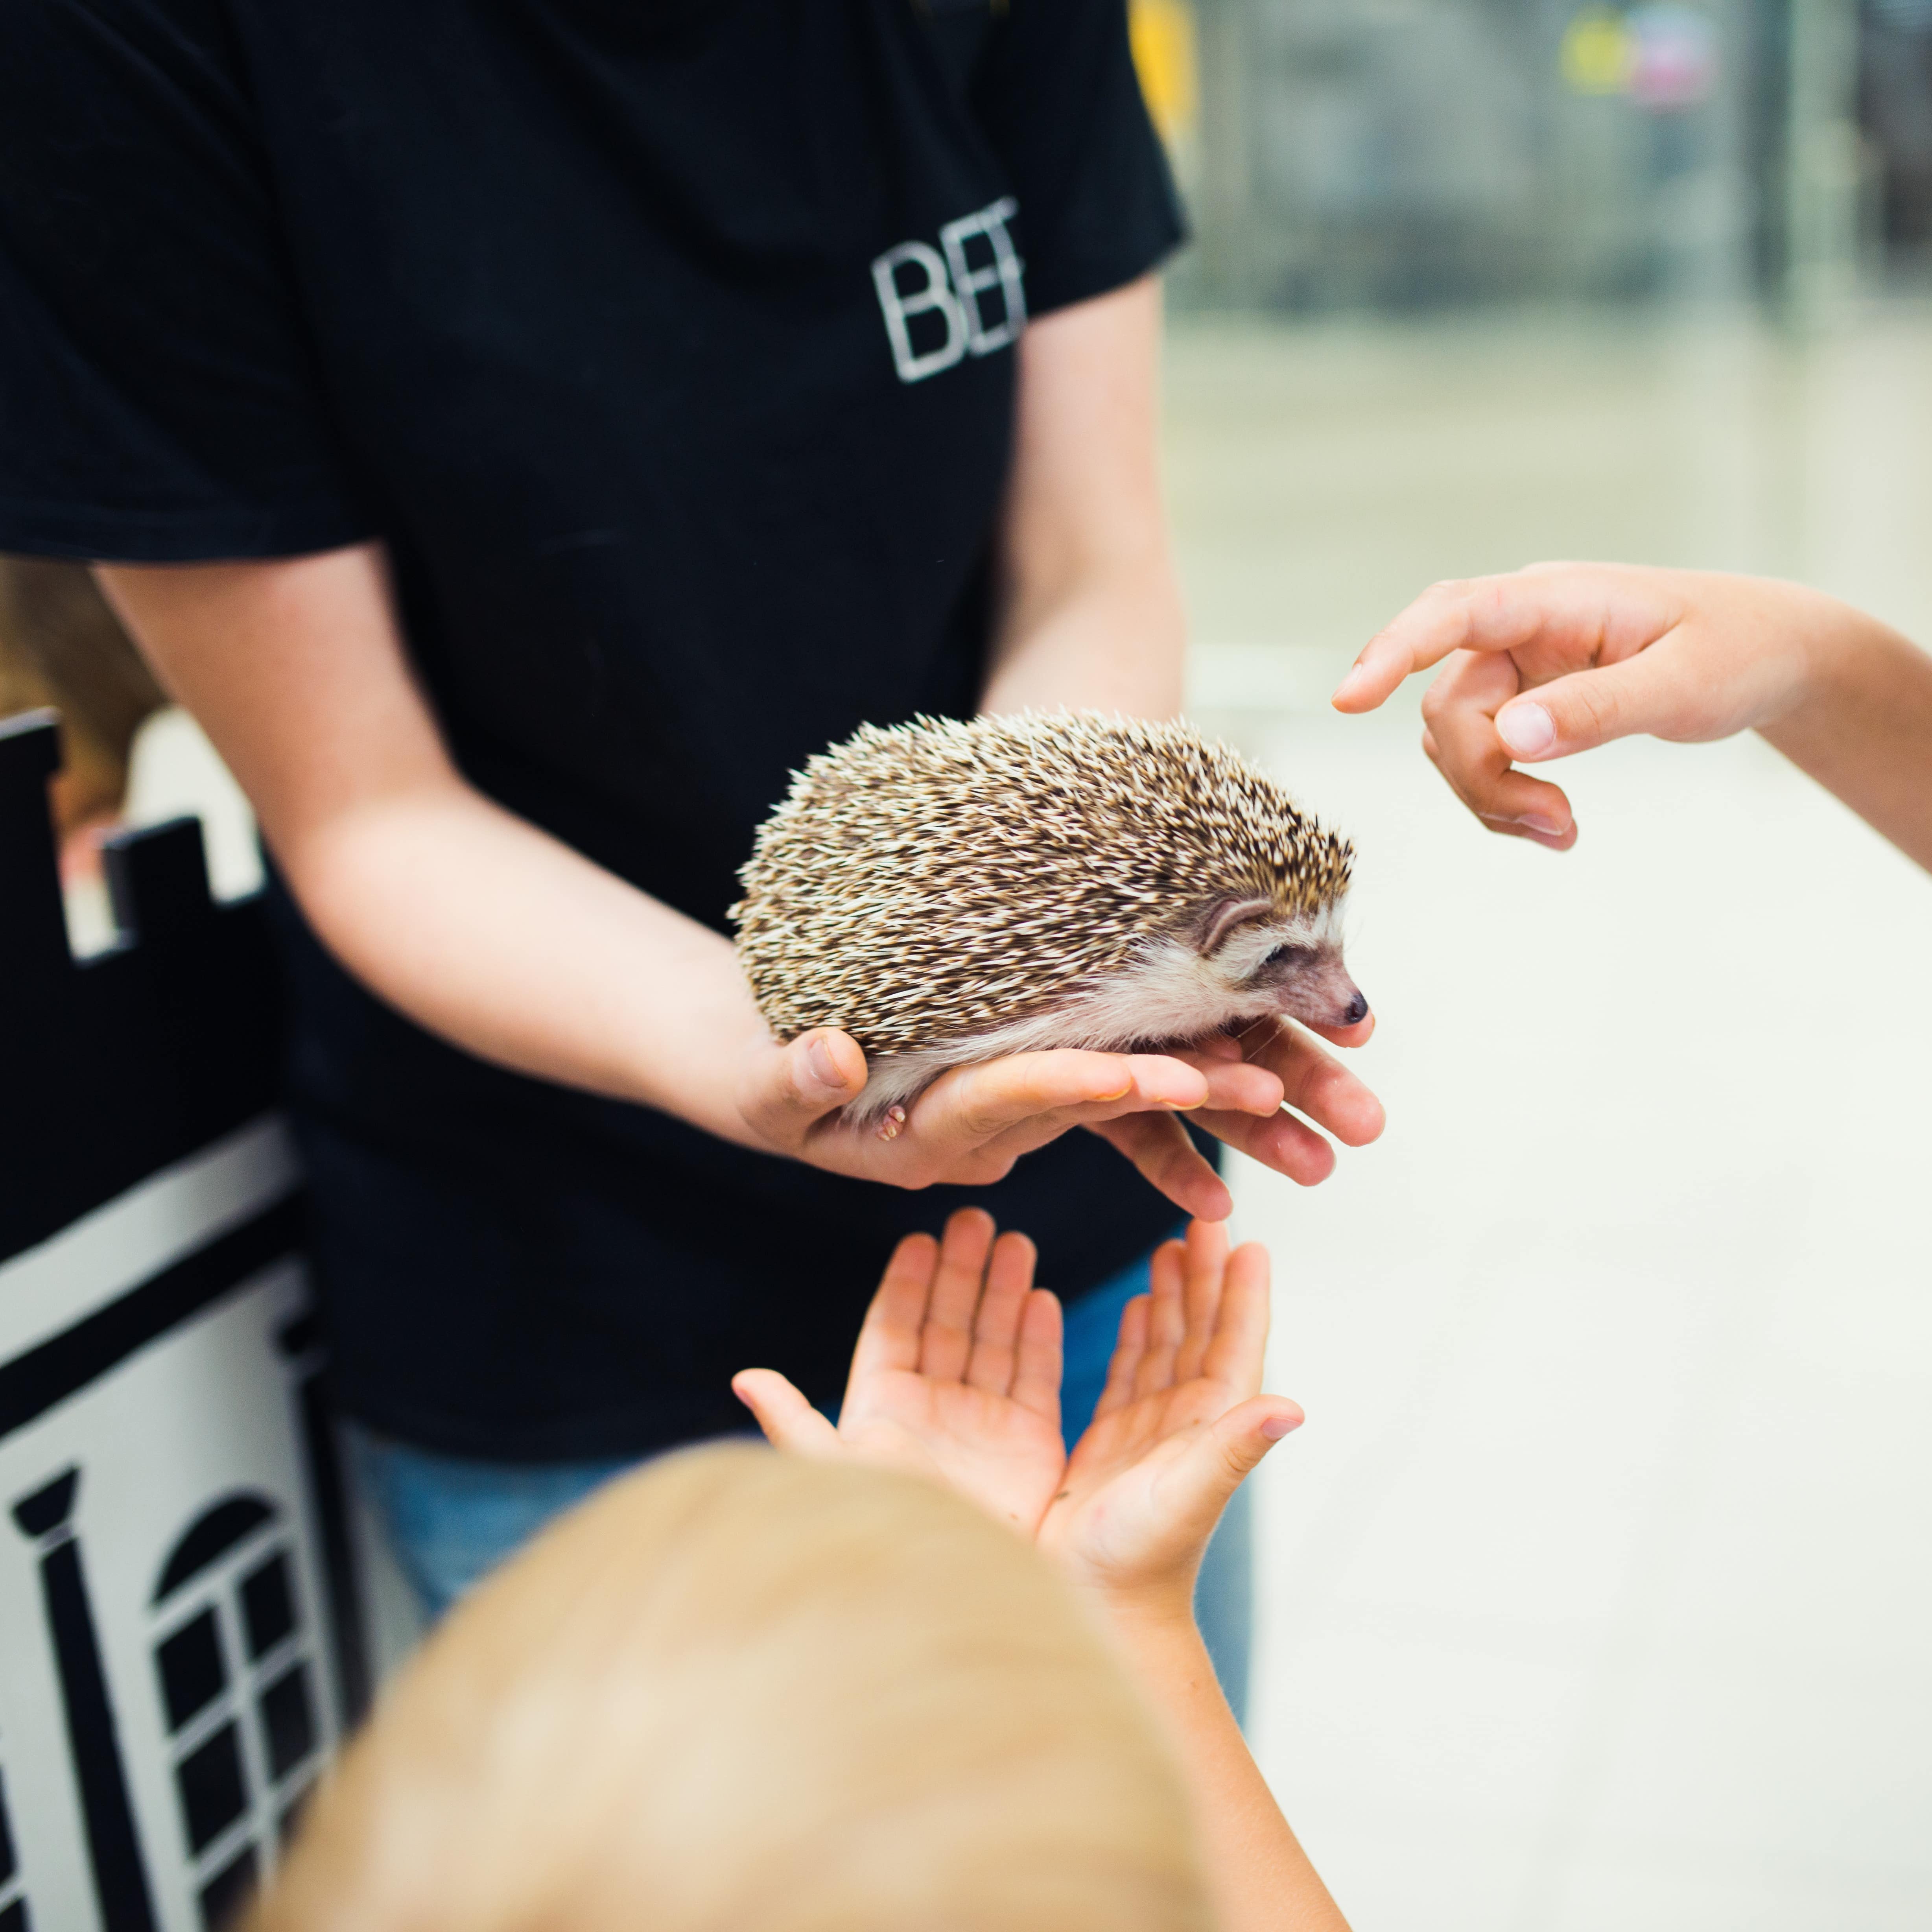 Petting a hedgehog at the zoo